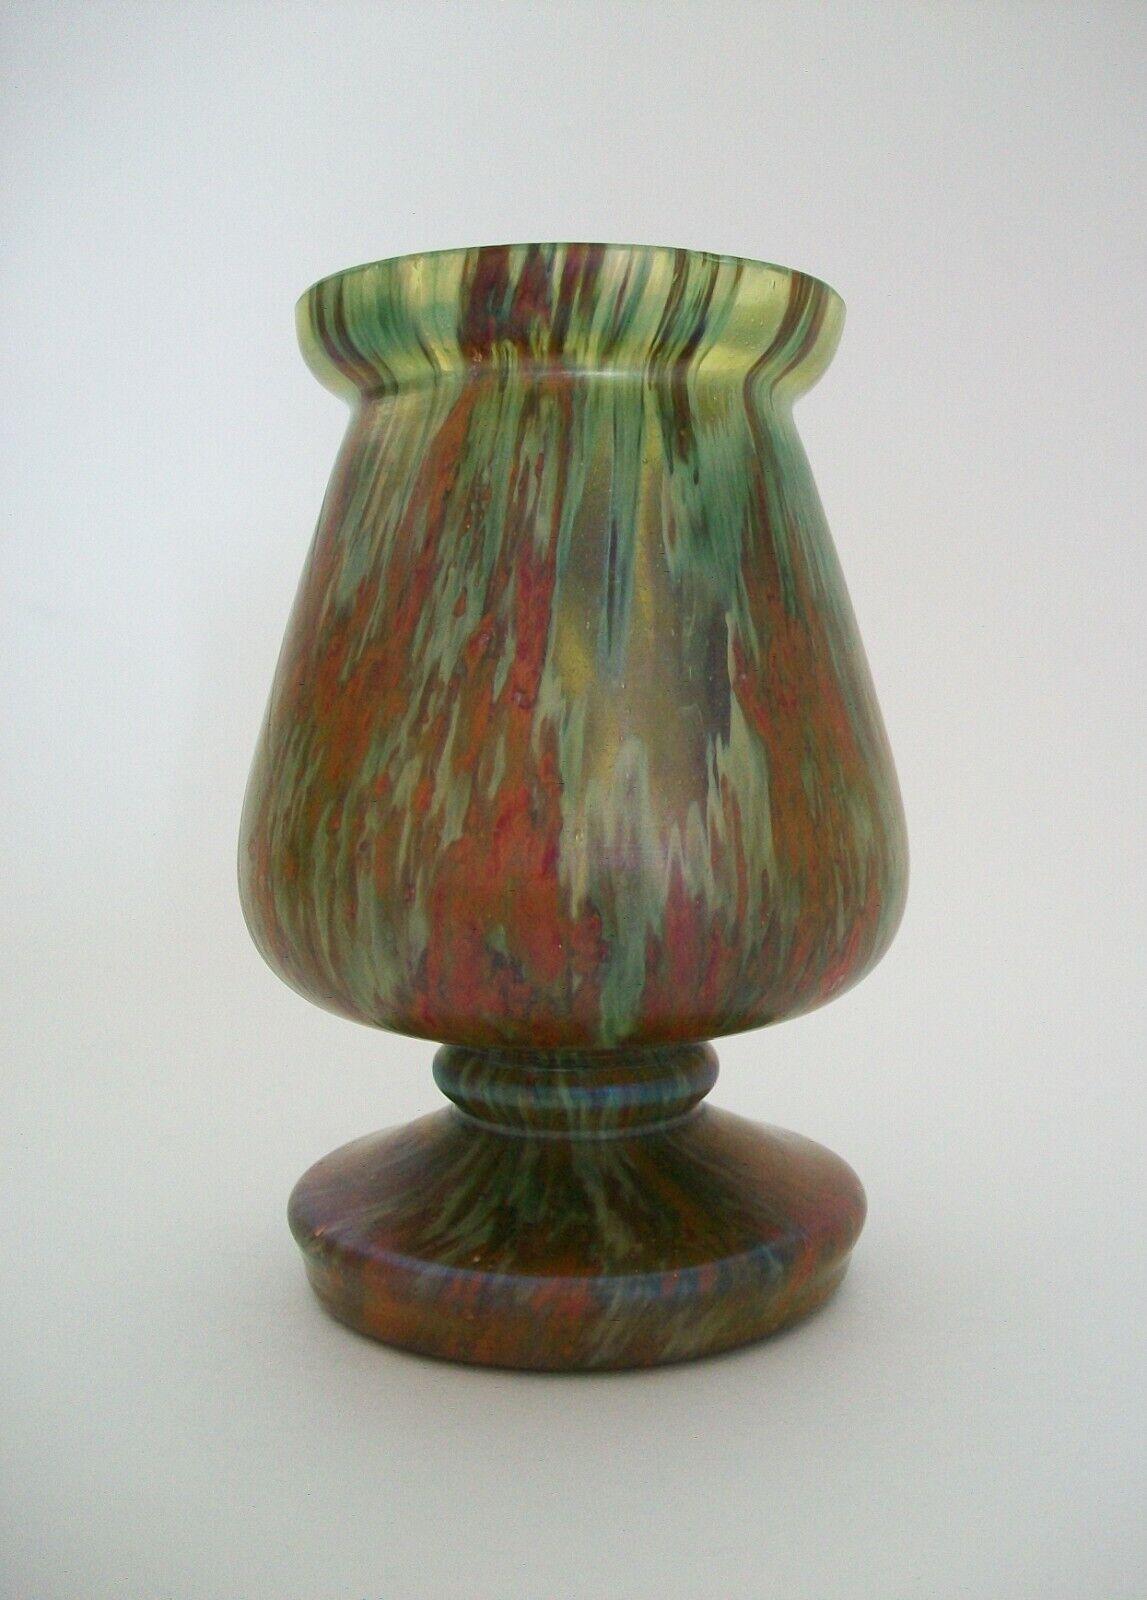 Kralik - Antique Bohemian Art Nouveau iridescent satin glass vase - 'chalice' form - striking color combination including copper streaking to the exterior - wheel polished rim - green glass to the interior - unsigned - Czech Republic - early 20th